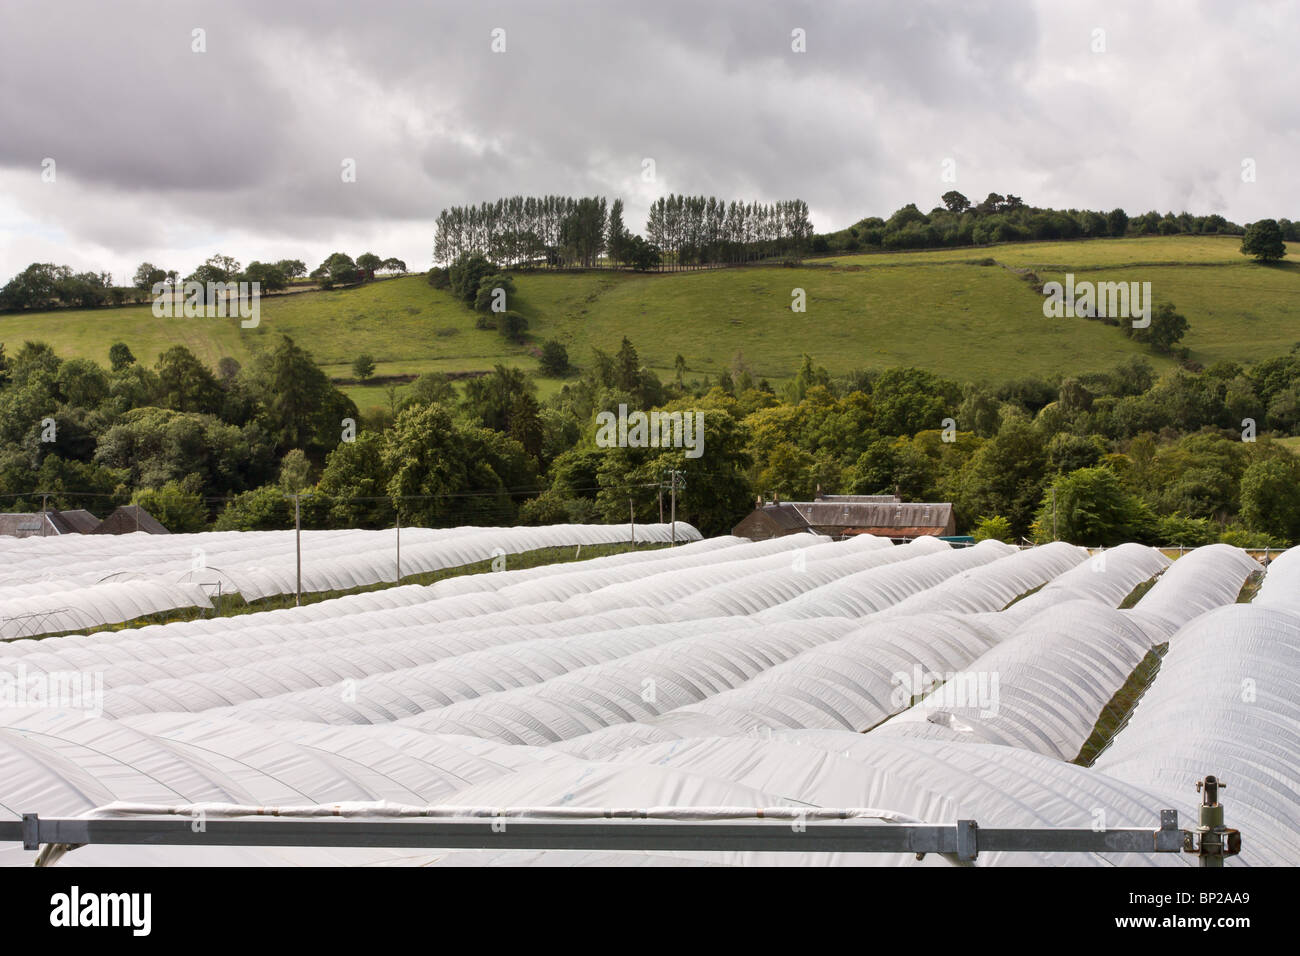 Rows of poly tunnels at a rural Scottish Soft Fruit farm Stock Photo